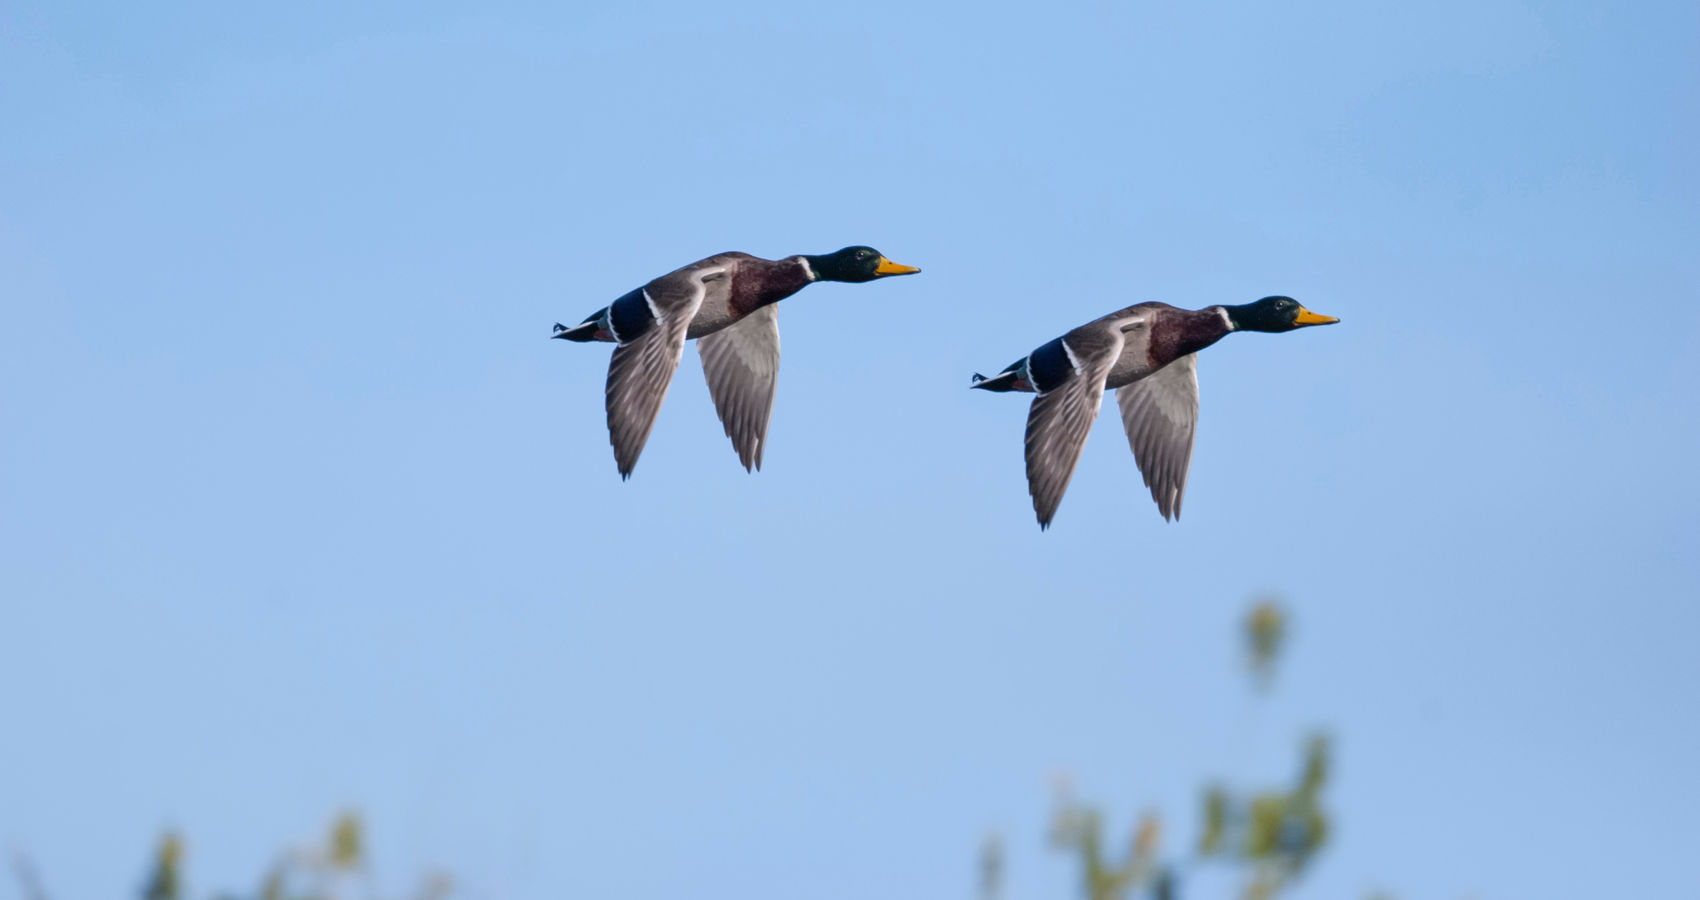 Mallards, Mounted on a Chimney Wall, poetry by D. R. James at Spillwords.com